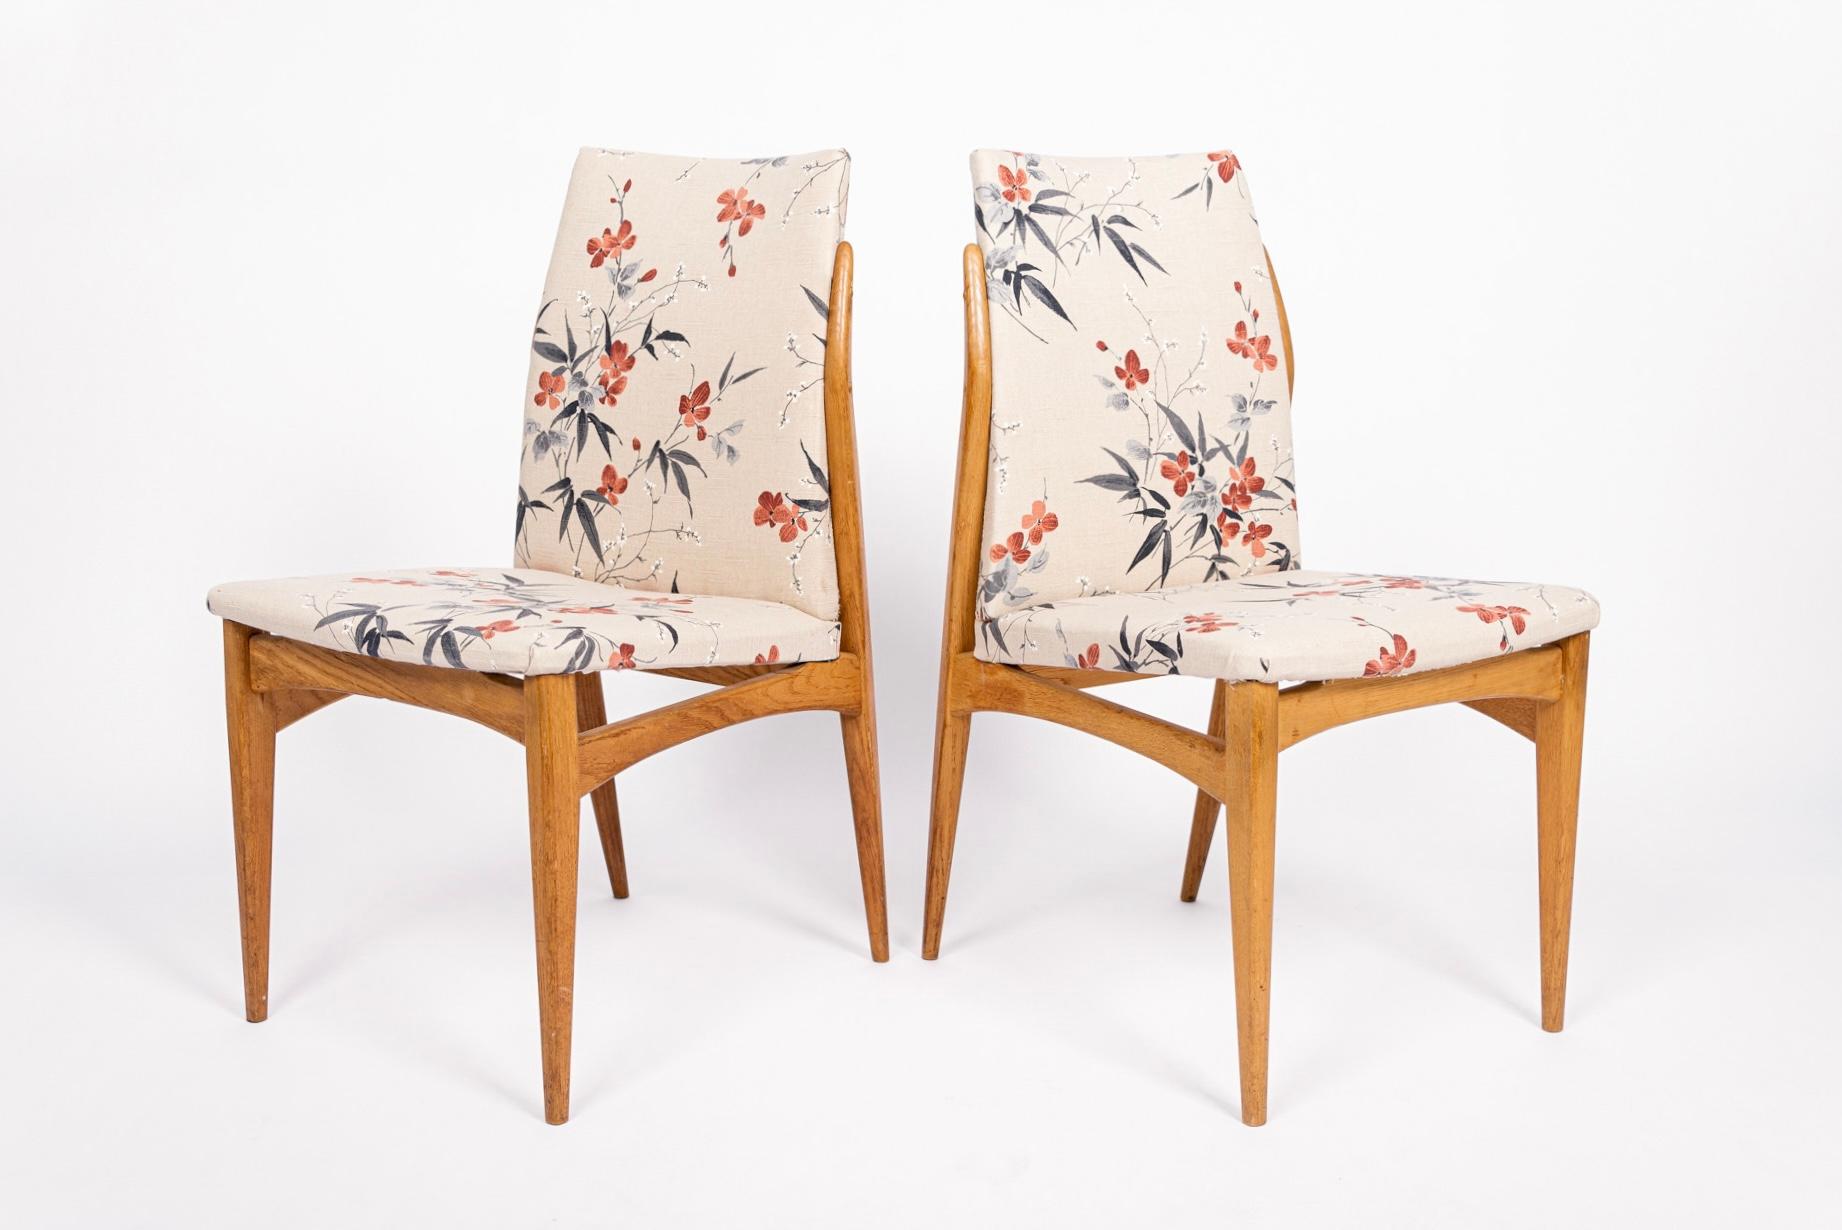 This pair of vintage mid century modern dining side chairs were sold by Macy’s in New York circa 1950. The classic and elegant Scandinavian modern design features solid blonde wood frames with clean lines and gentle curves. The chairs have been